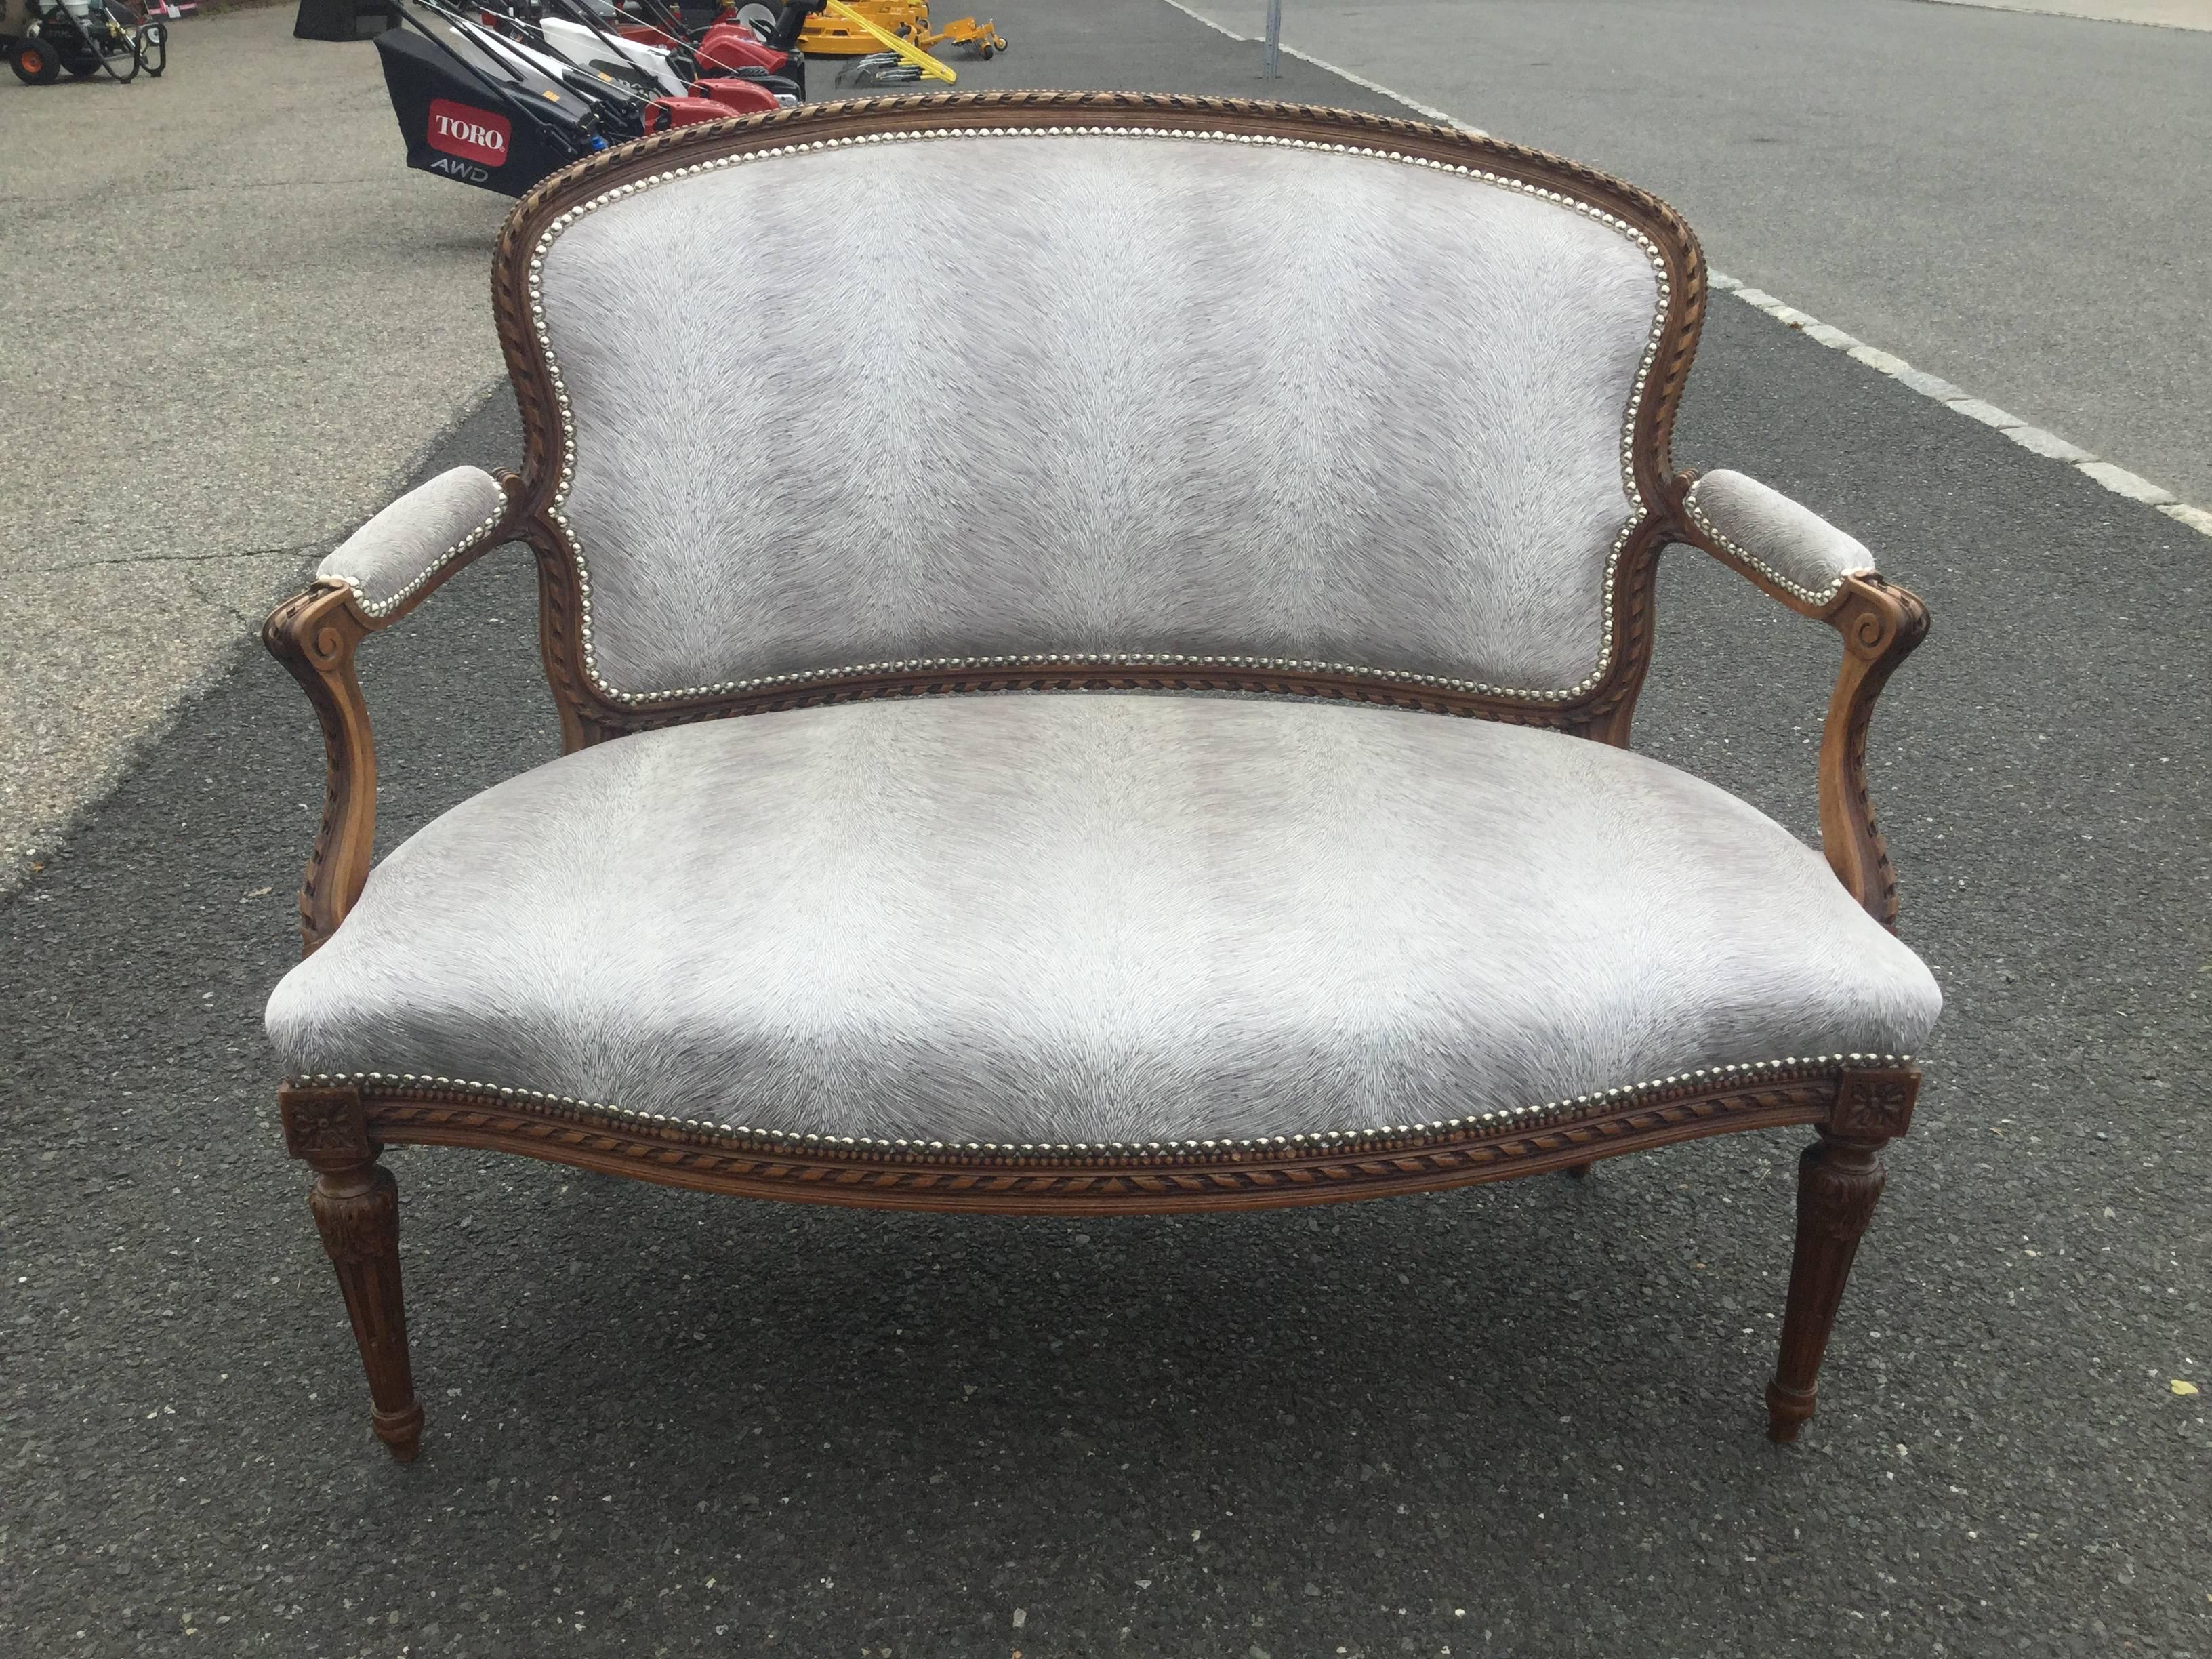 Early 20th Century Glamorous French Louis XVI Style Settee